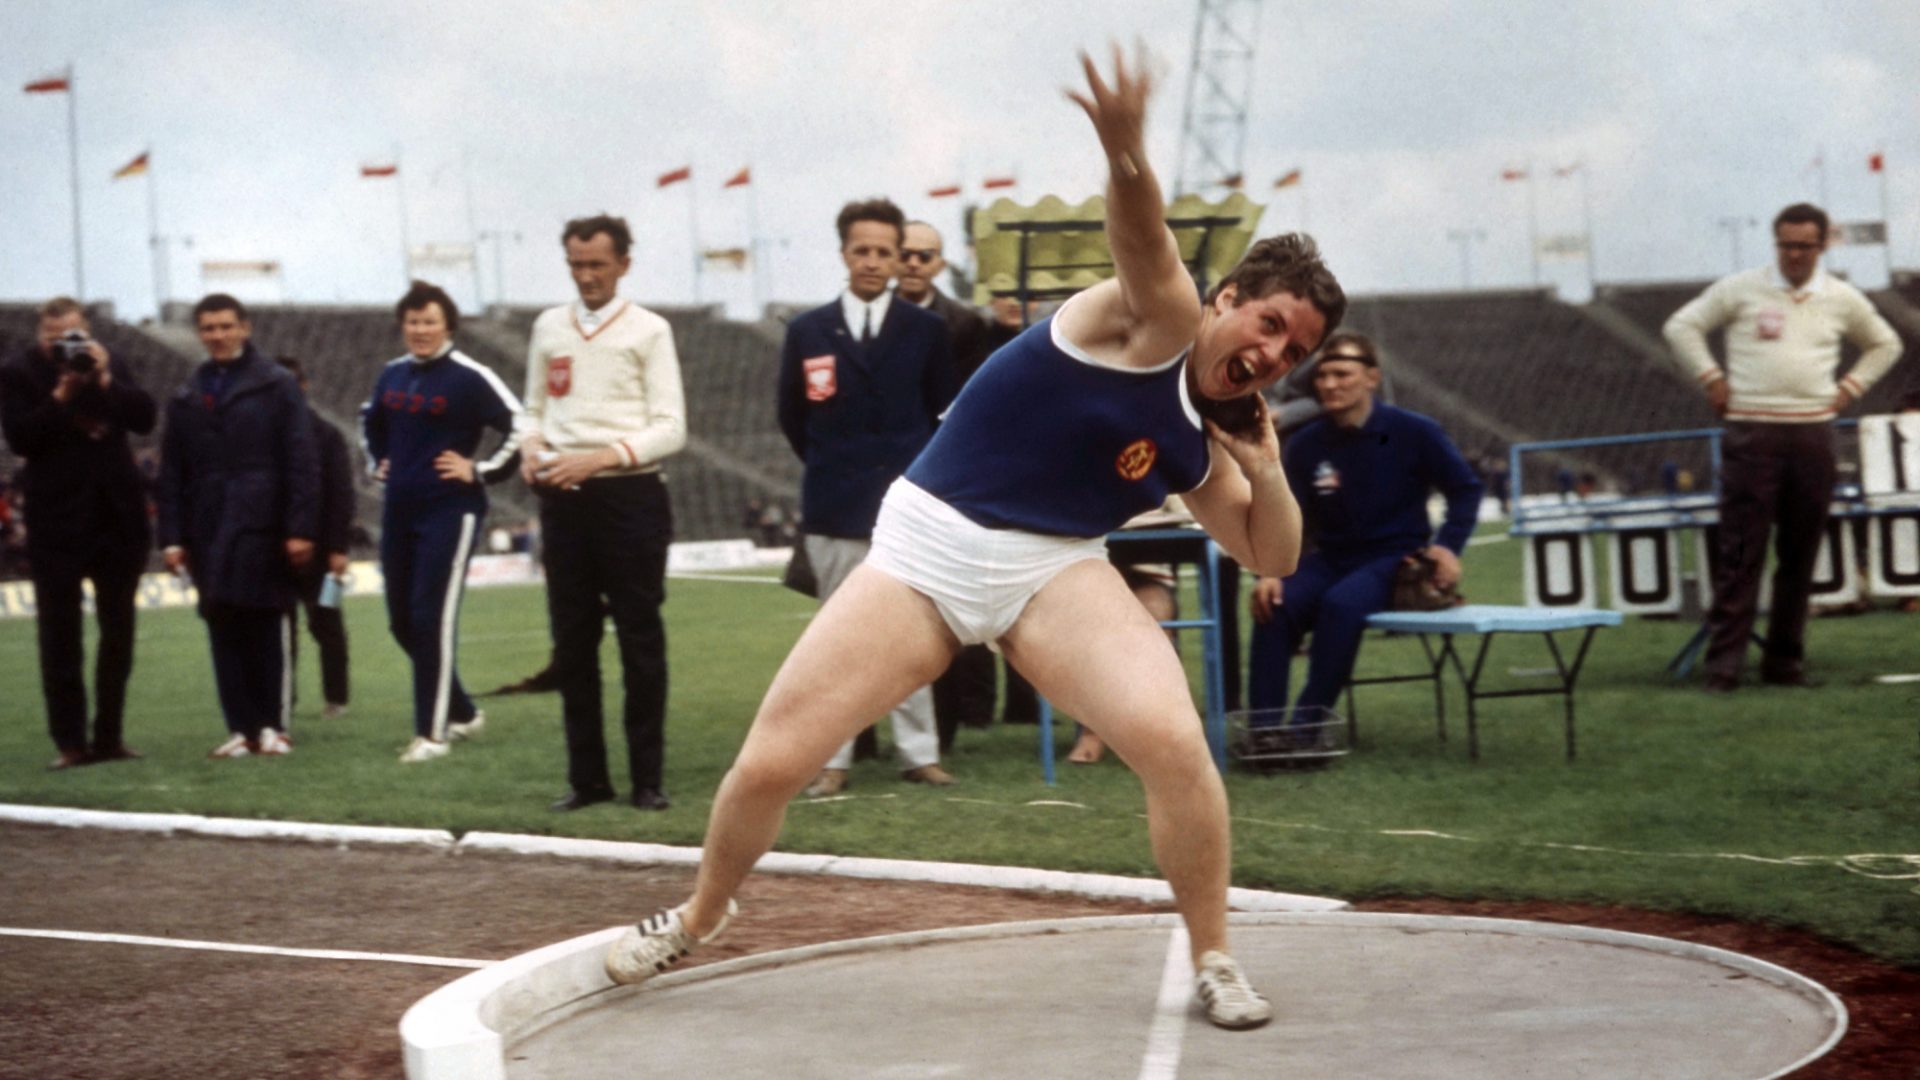 Margitta Gummel competes in the shot put for the GDR at an international competition in Katowice, Poland, July 1969. Photo: Werner Schulze/Getty